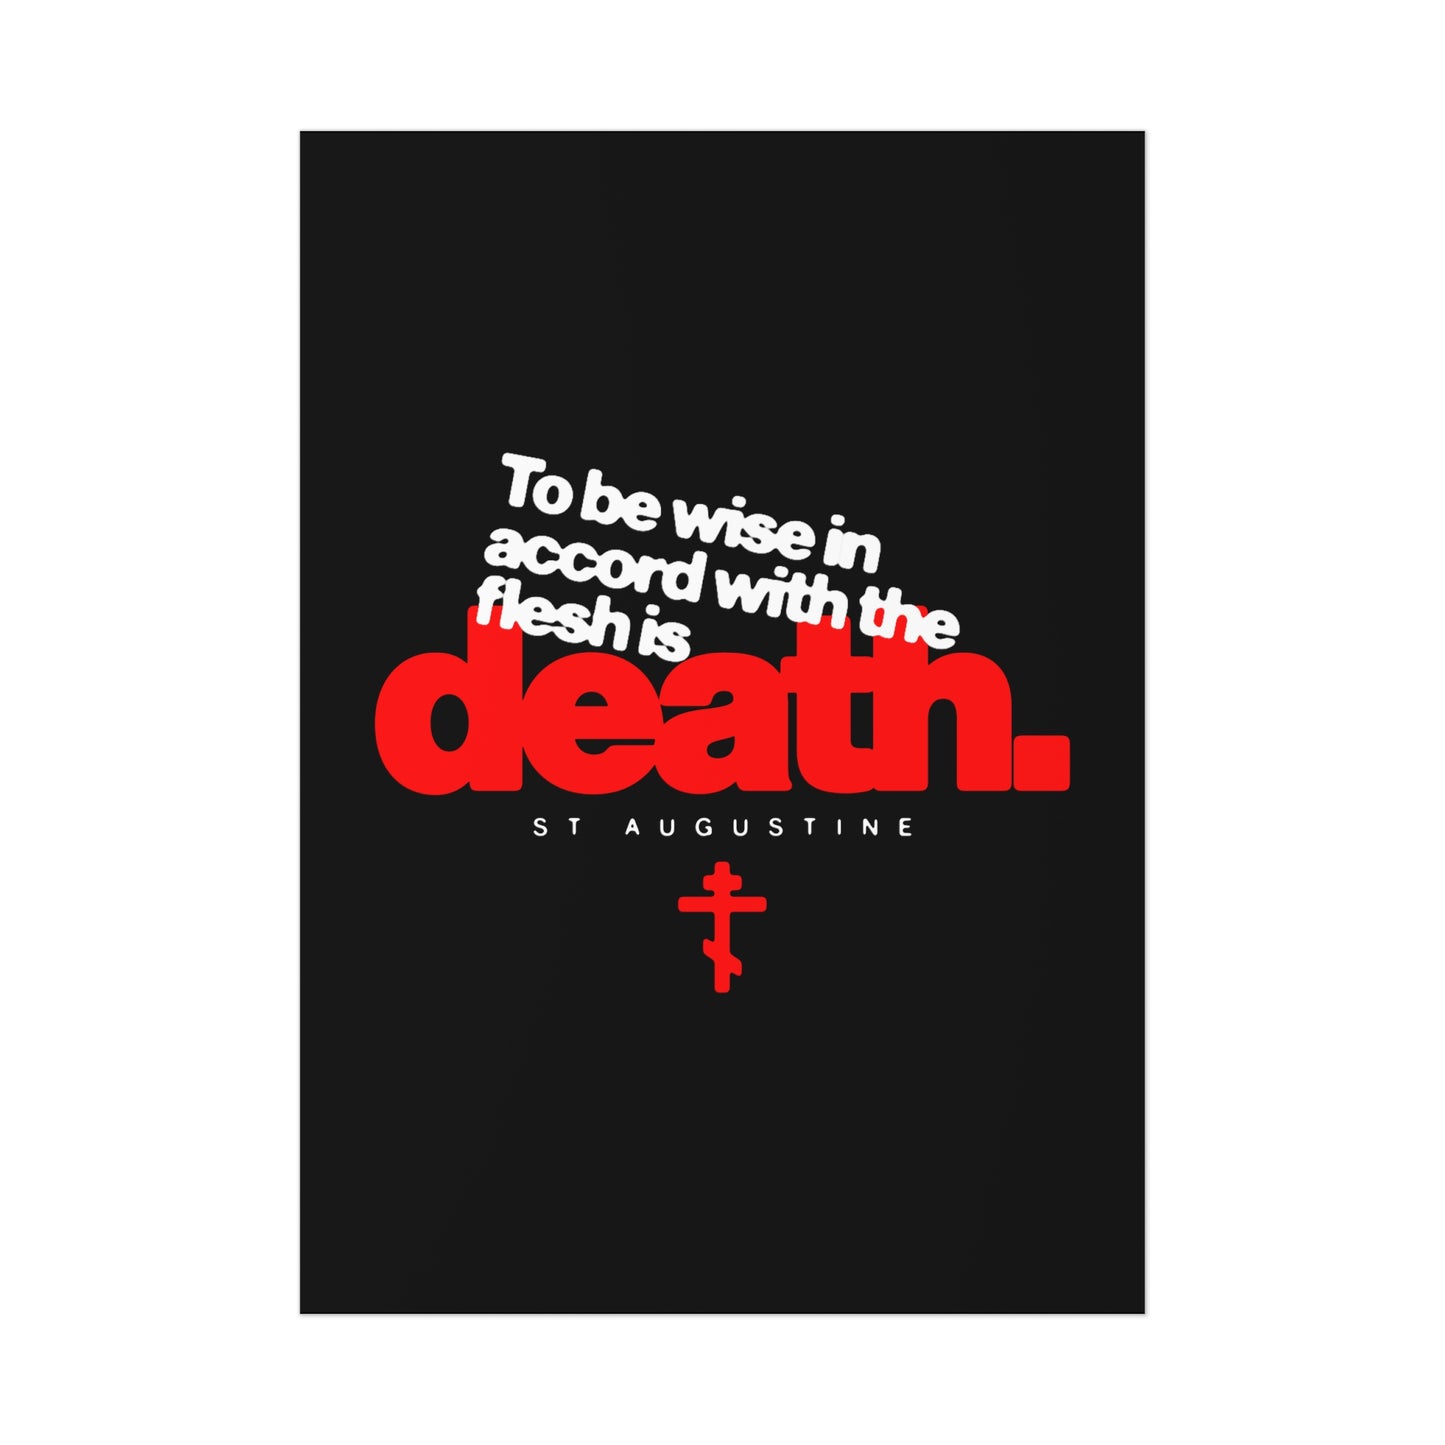 To Be Wise In Accord With the Flesh is Death (St Augustine) No. 1 | Orthodox Christian Art Poster